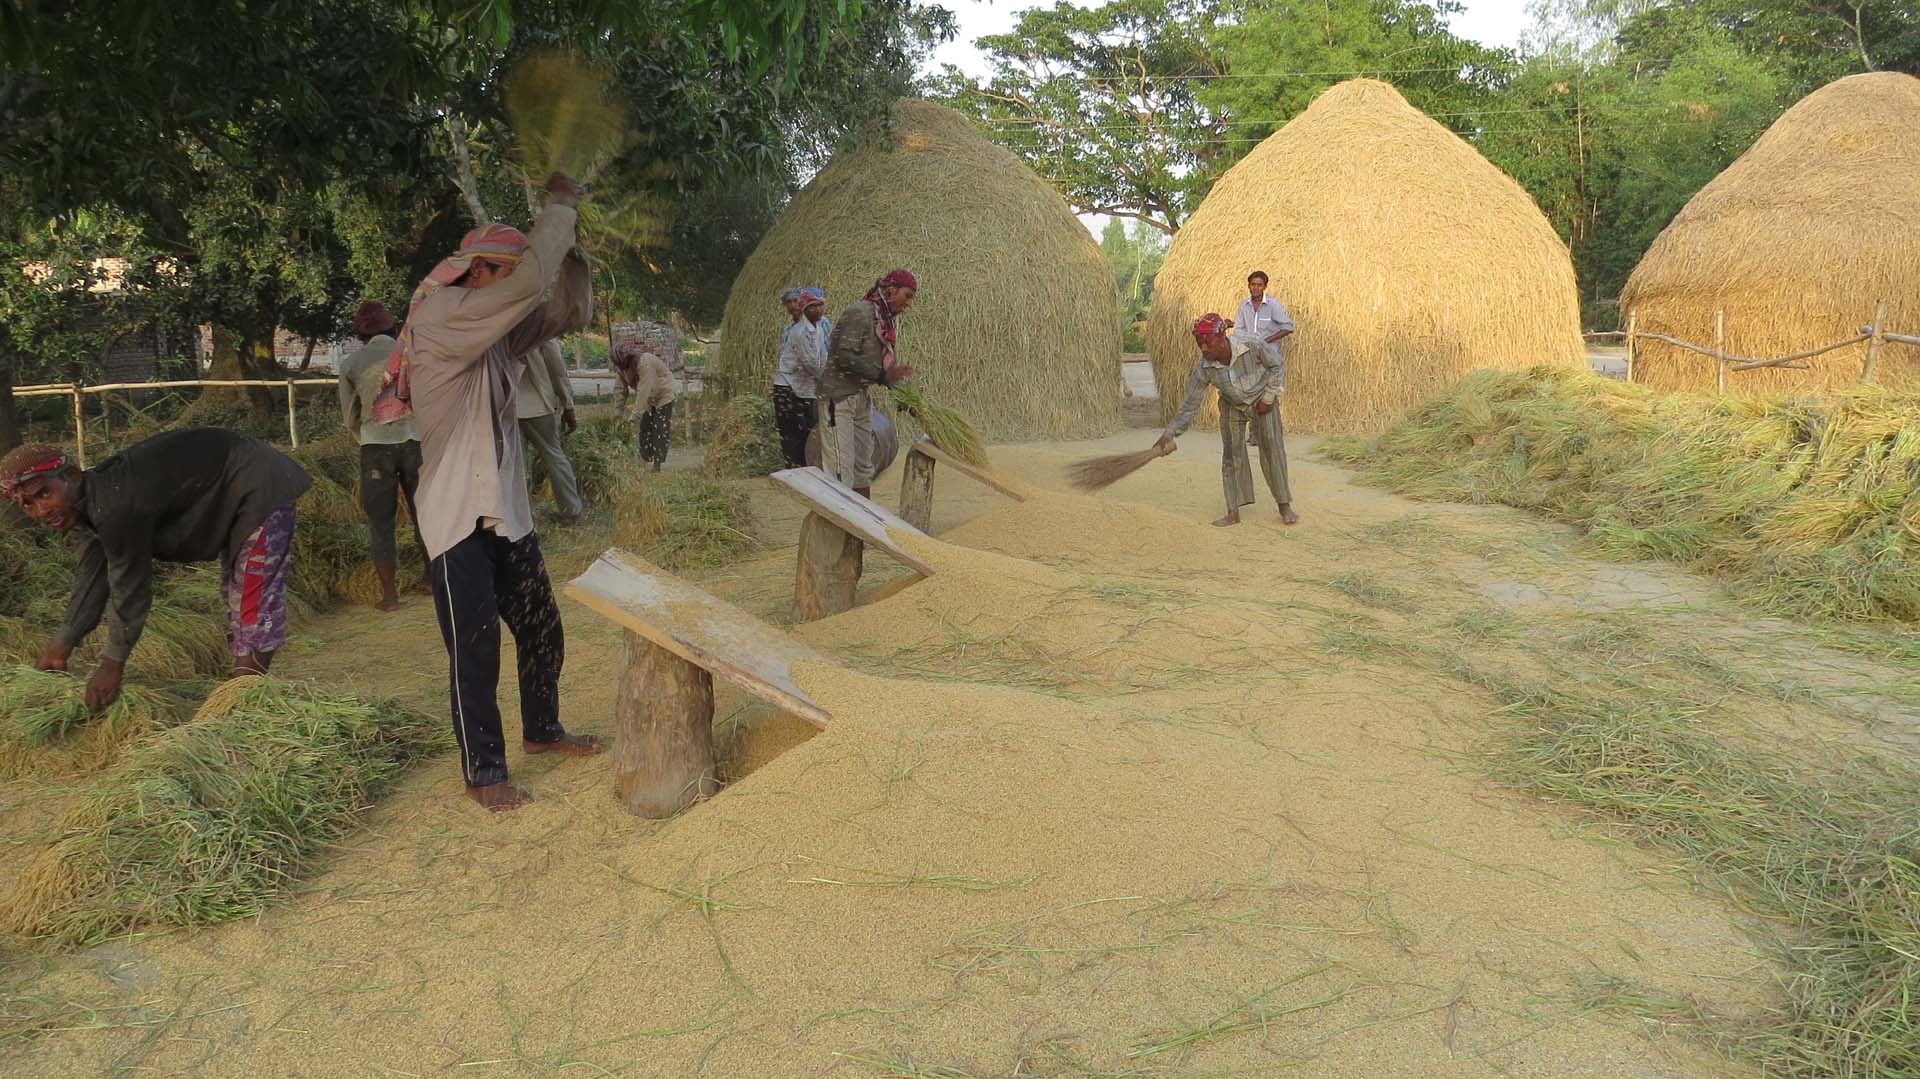 Photograph of men threshing rice in Bangladesh. The photo shows a line of three threshing boards. The boards each have one end propped in the air by a log and the other end sitting on the ground. Men stand behind to of the boards, beating handfuls of rice against the boards to release the grain. Piles of grain can be seen in front of boards.